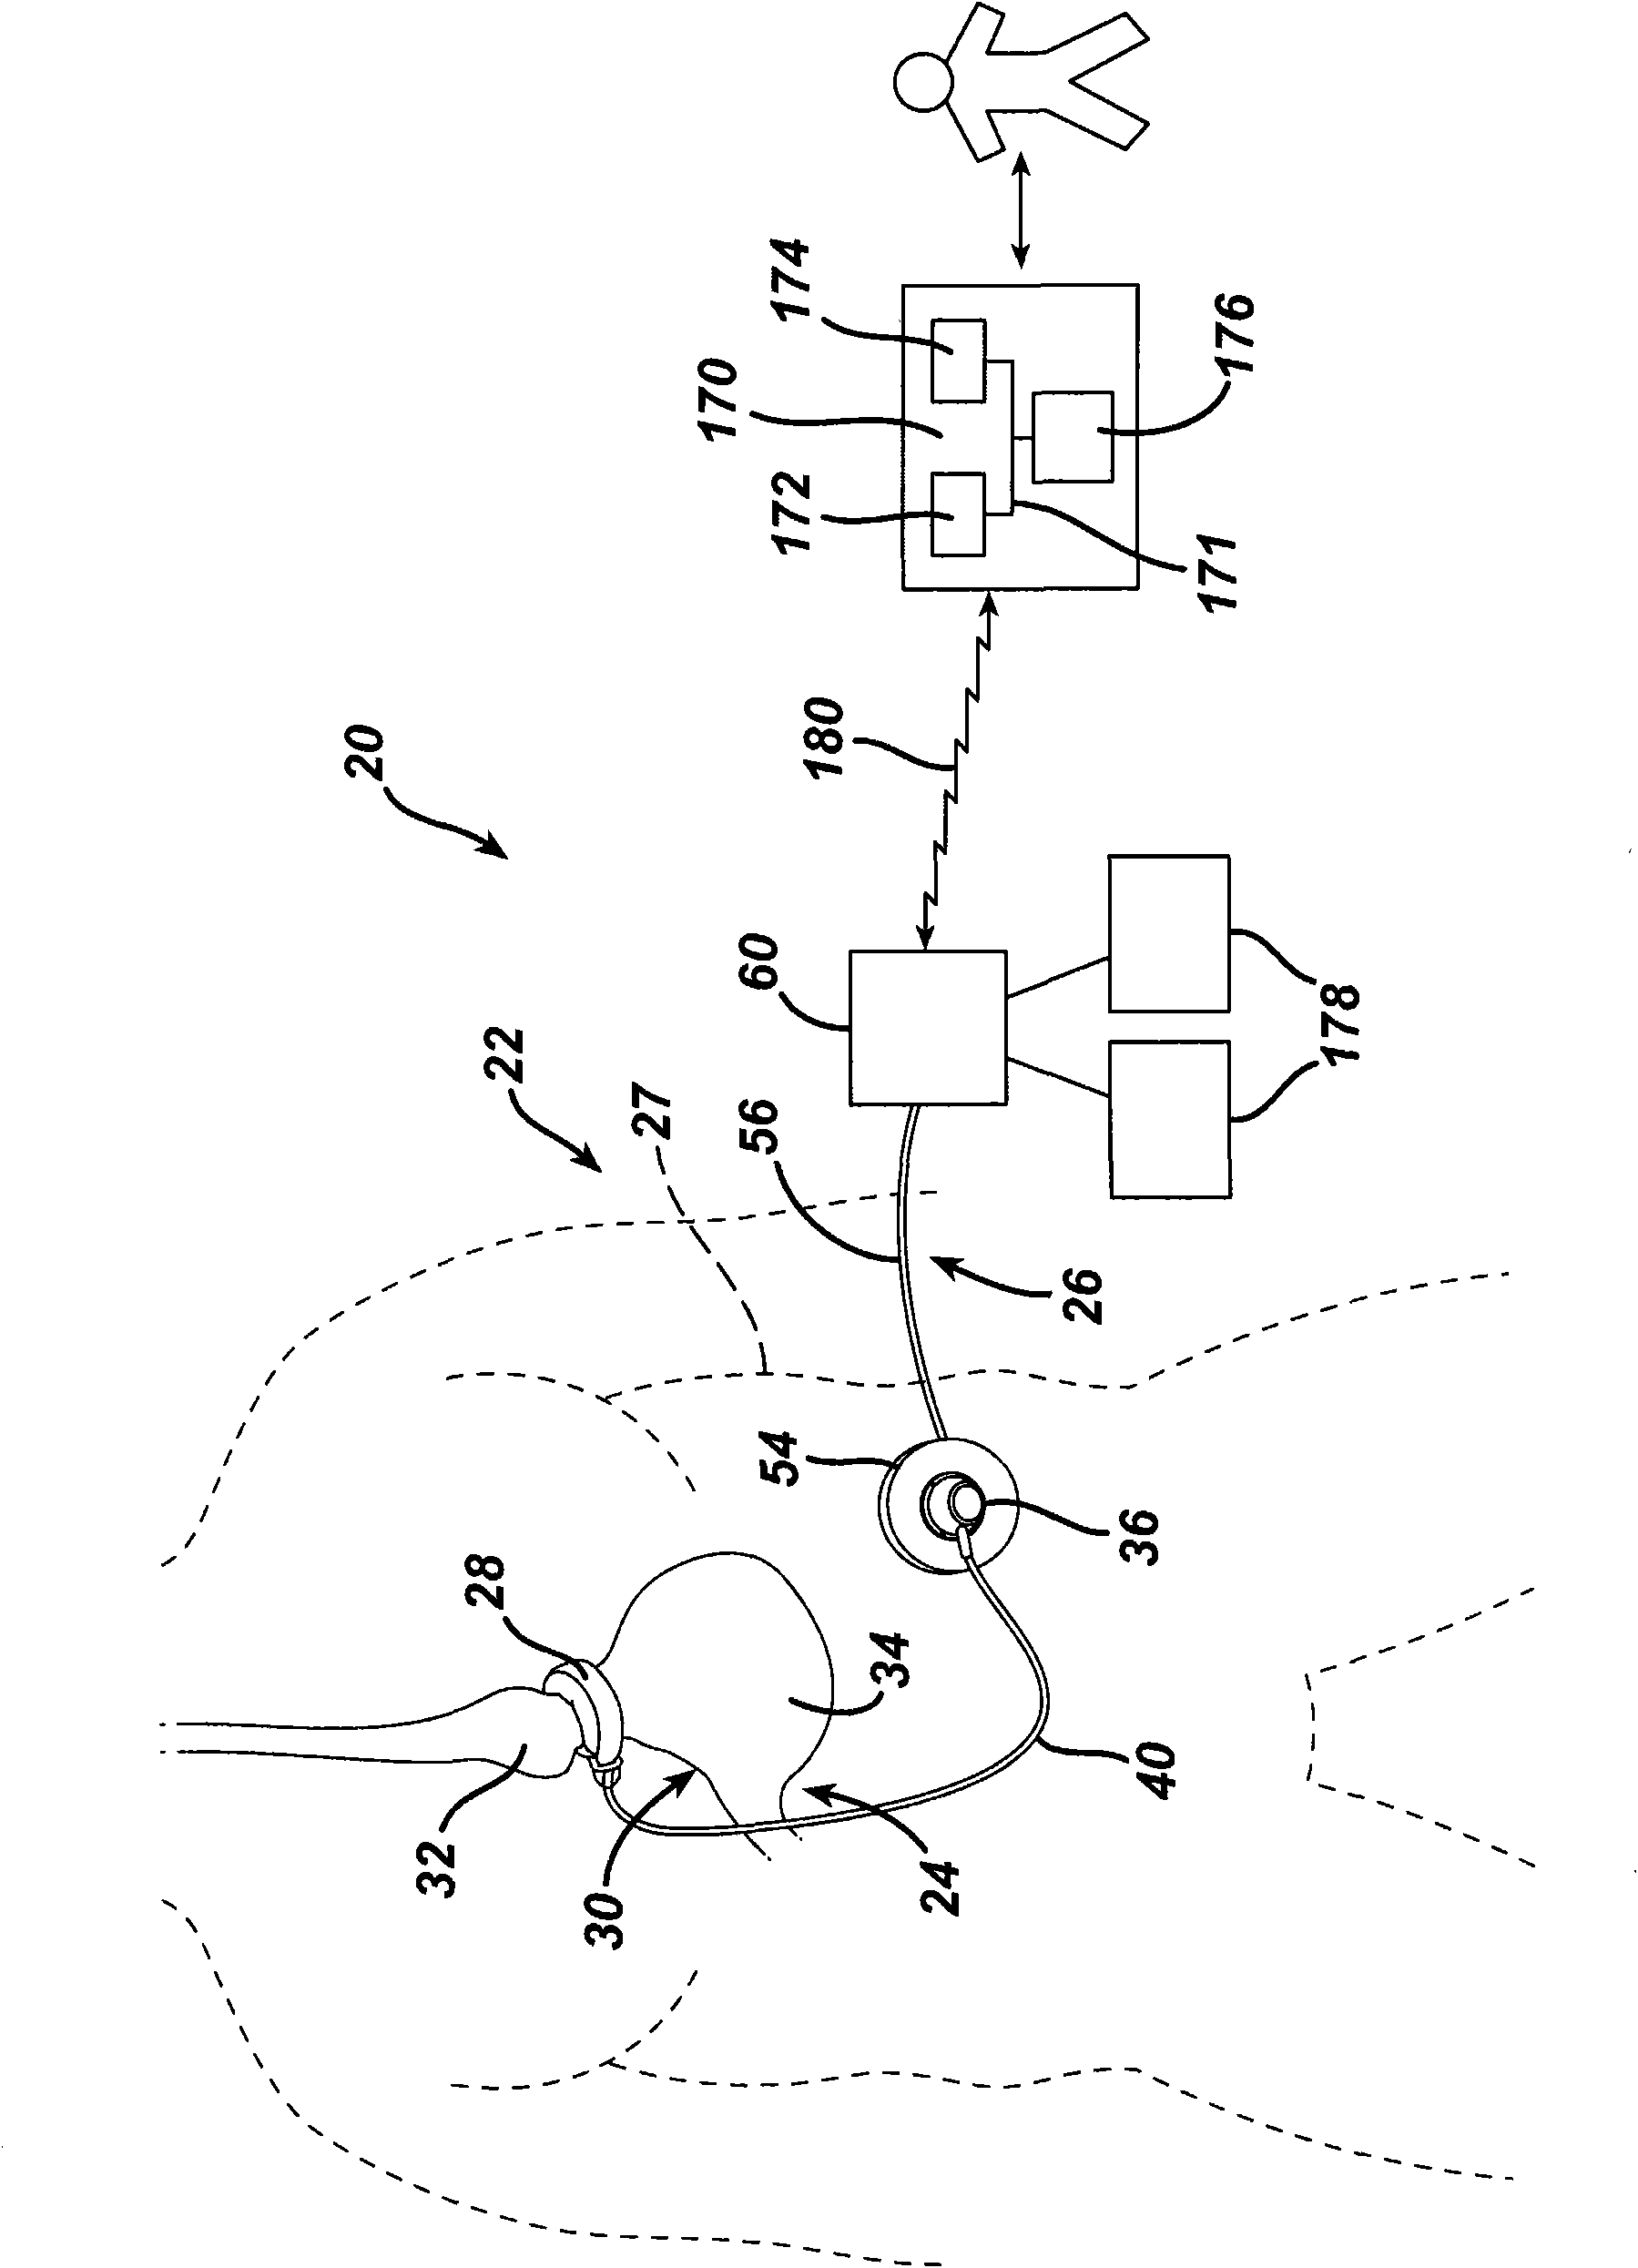 Data analysis for an implantable restriction device and a data logger